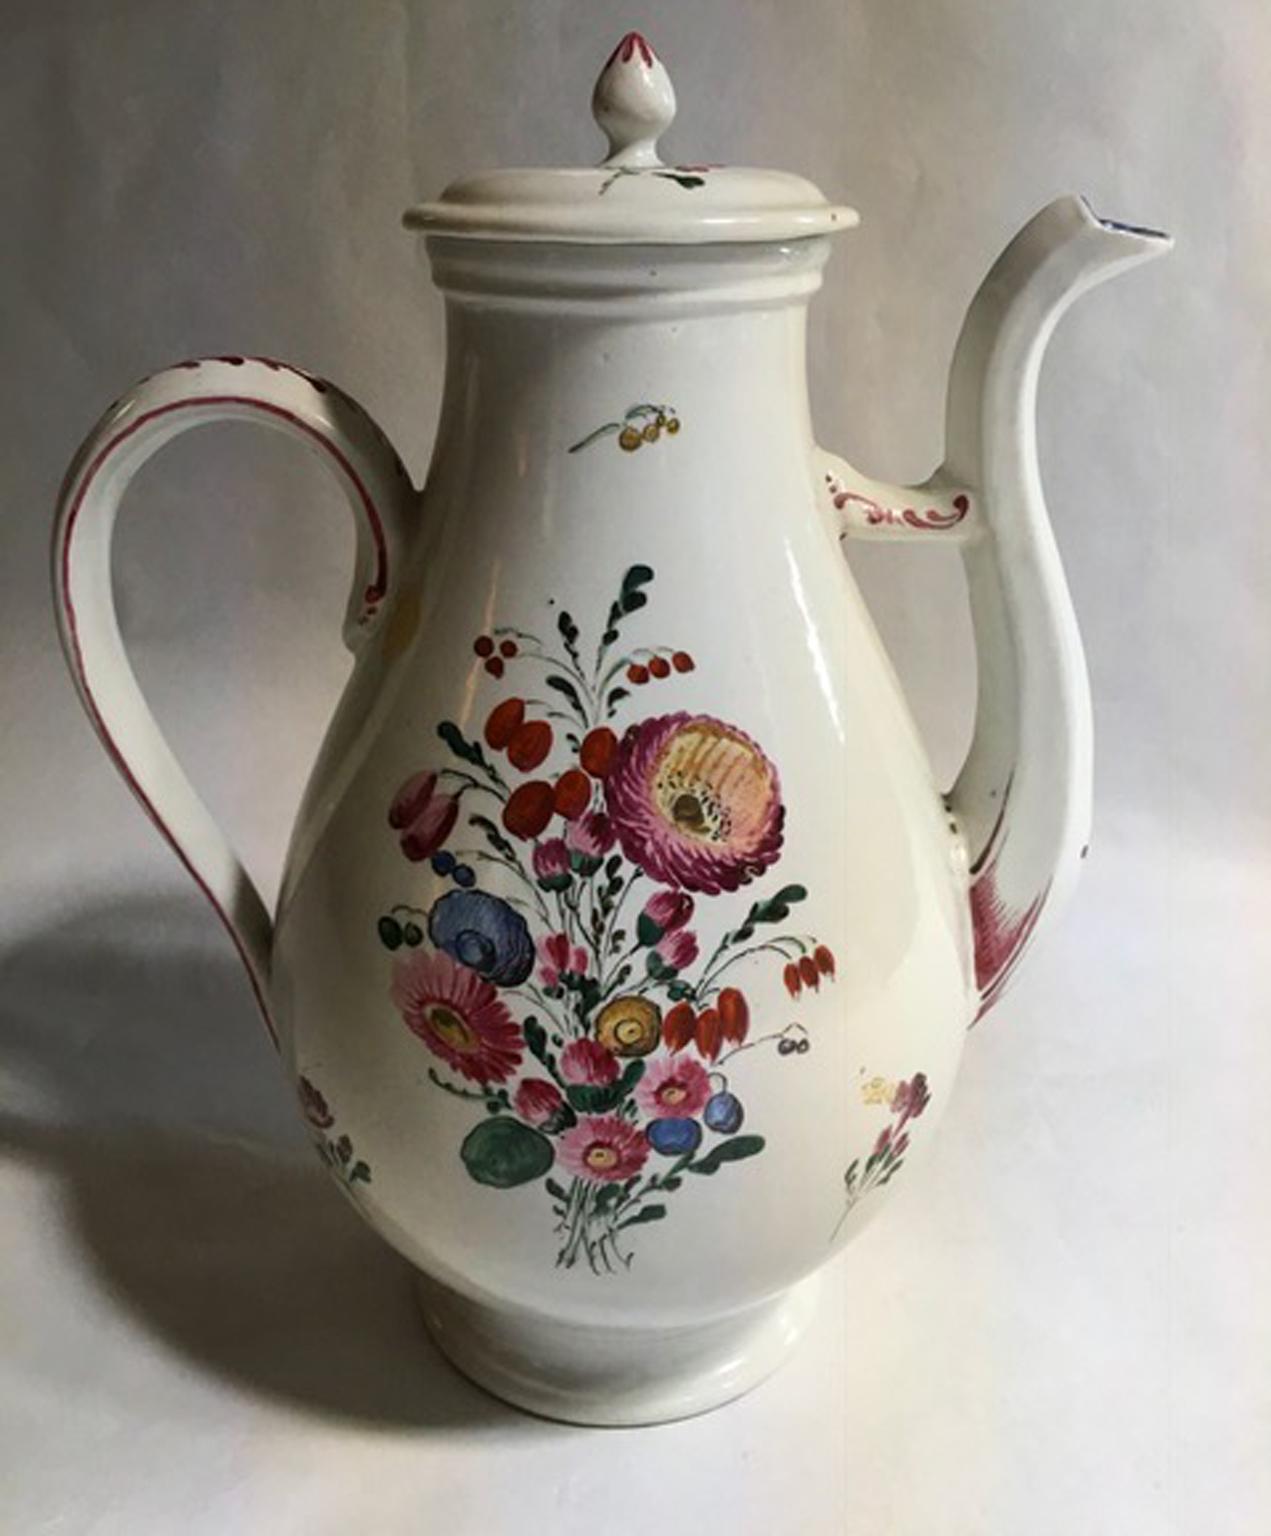 This is an Italian porcelain piece handmade by Richard Ginori. The high quality of this Italian production of Doccia, is recognizable at first glance. The flower decoration with pink roses and country flowers is hand painted with great skill.

The